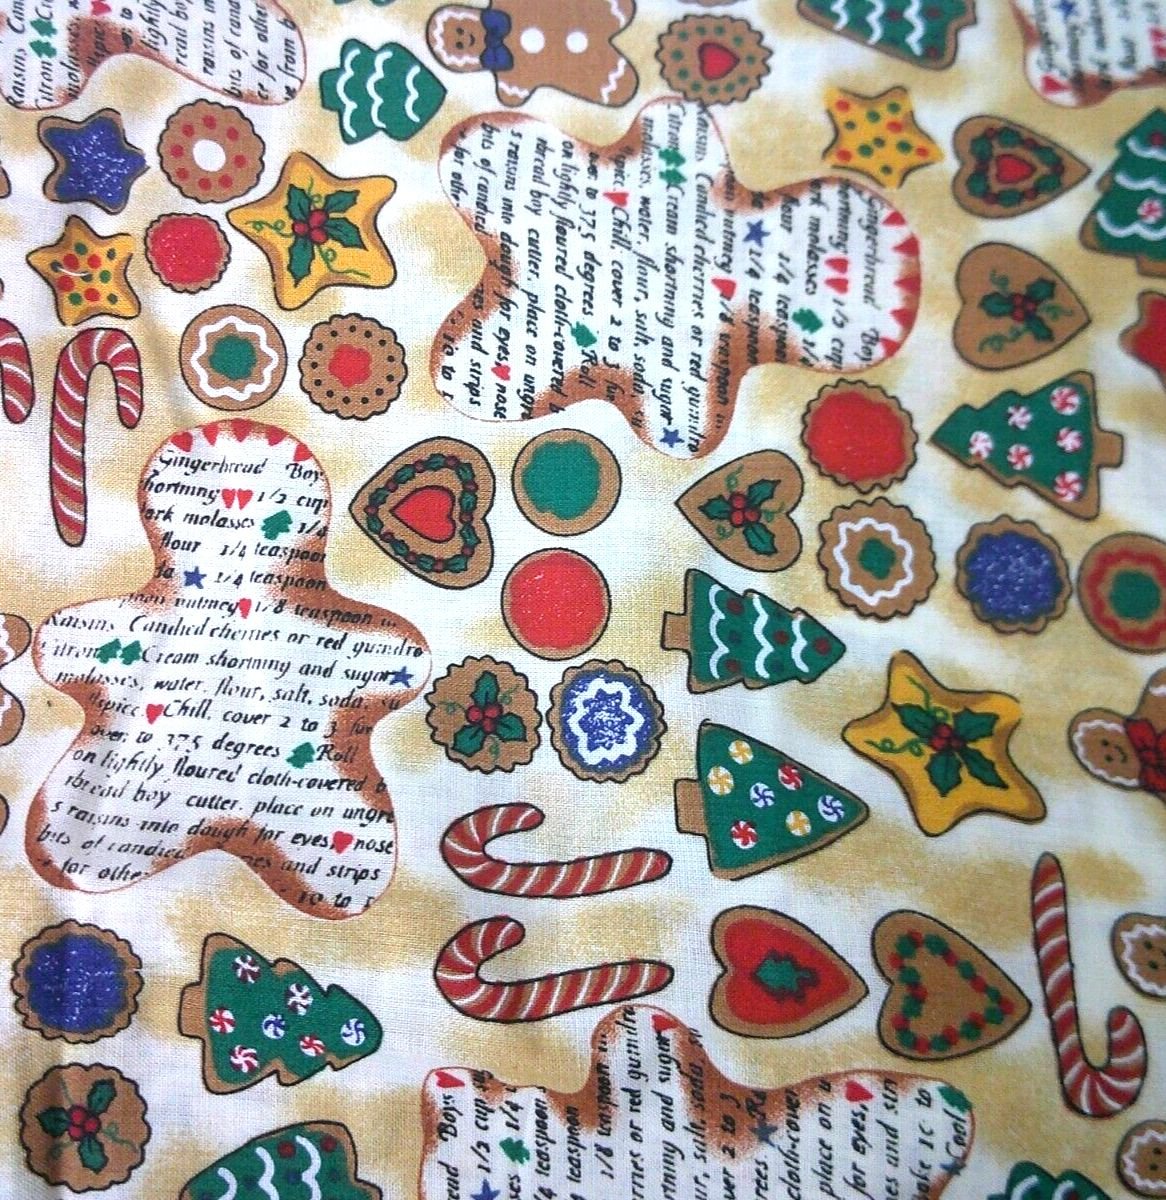 Home Made Christmas Love Fabric 1997 Balson Erlanger Gingerbread Cookie 5.75 Yds 1igX45KXH